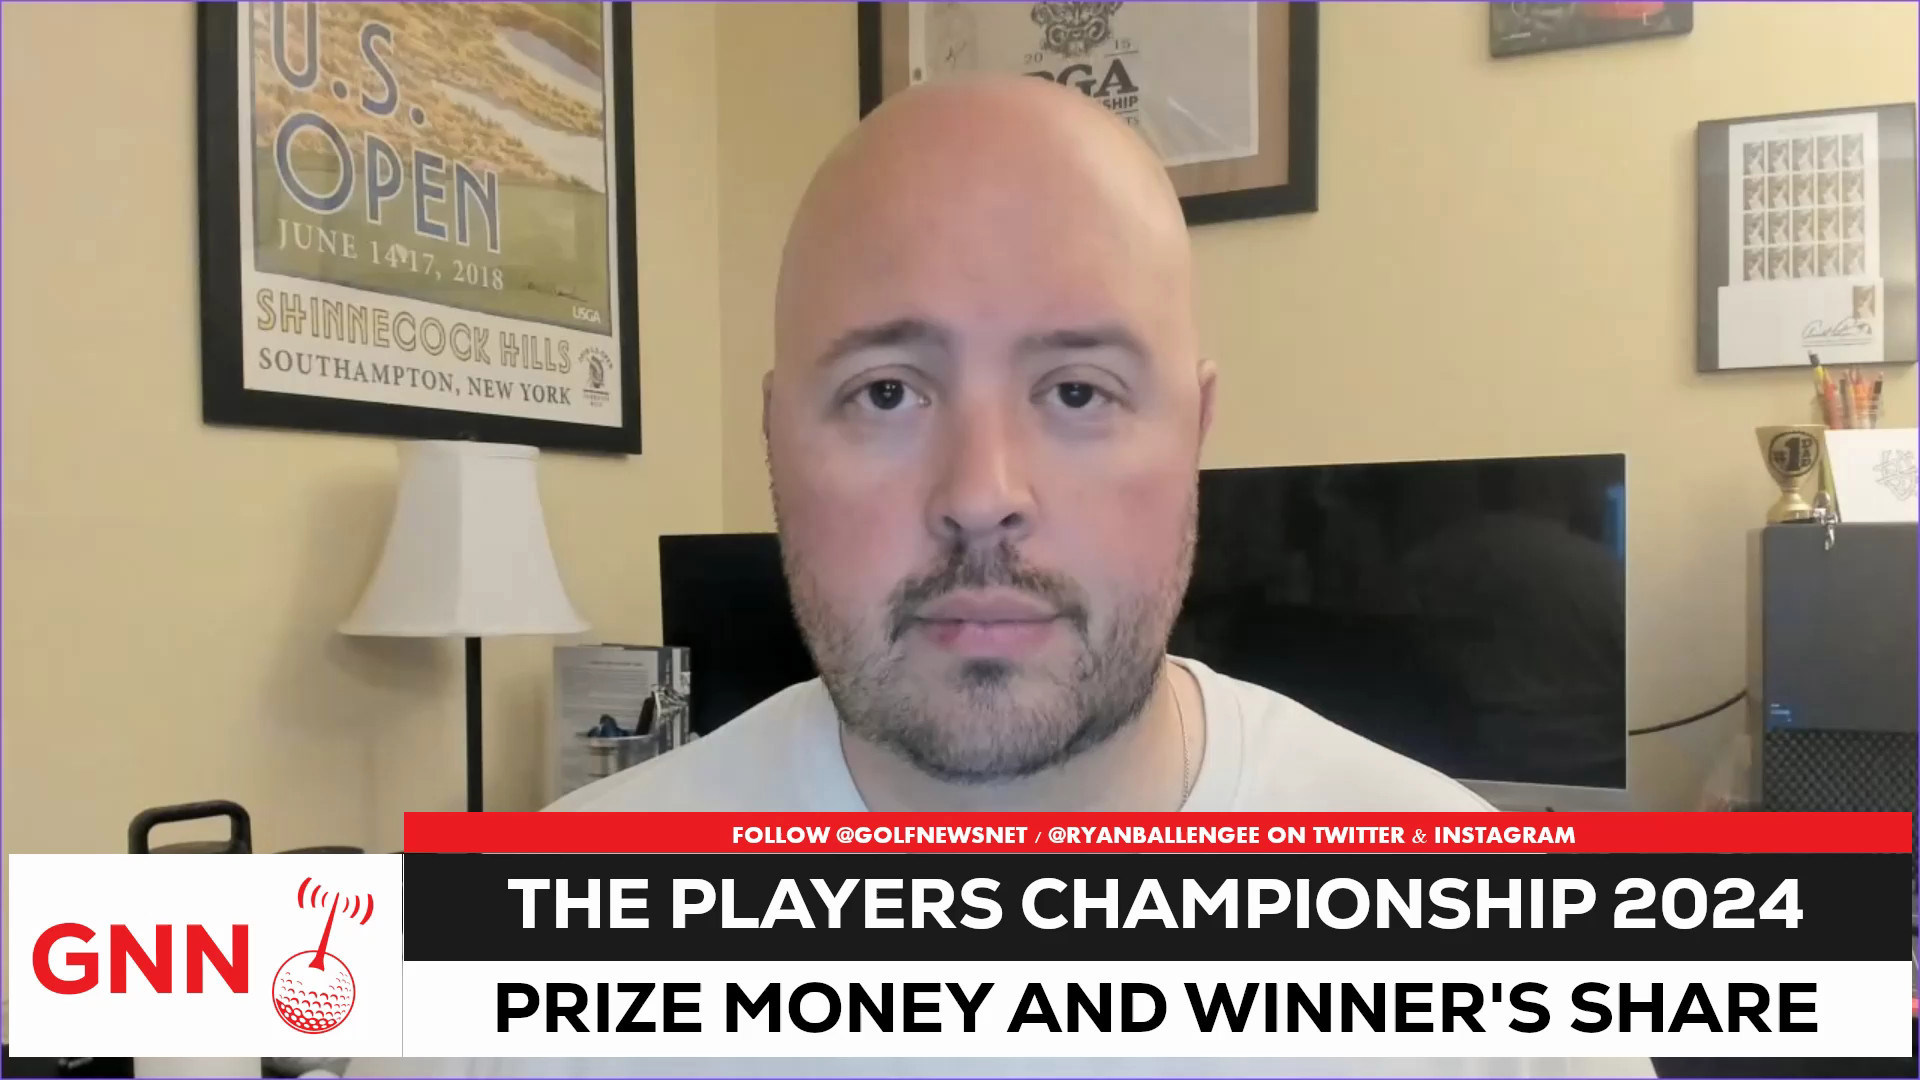 The Players Championship 2024 purse and winner's share are huge